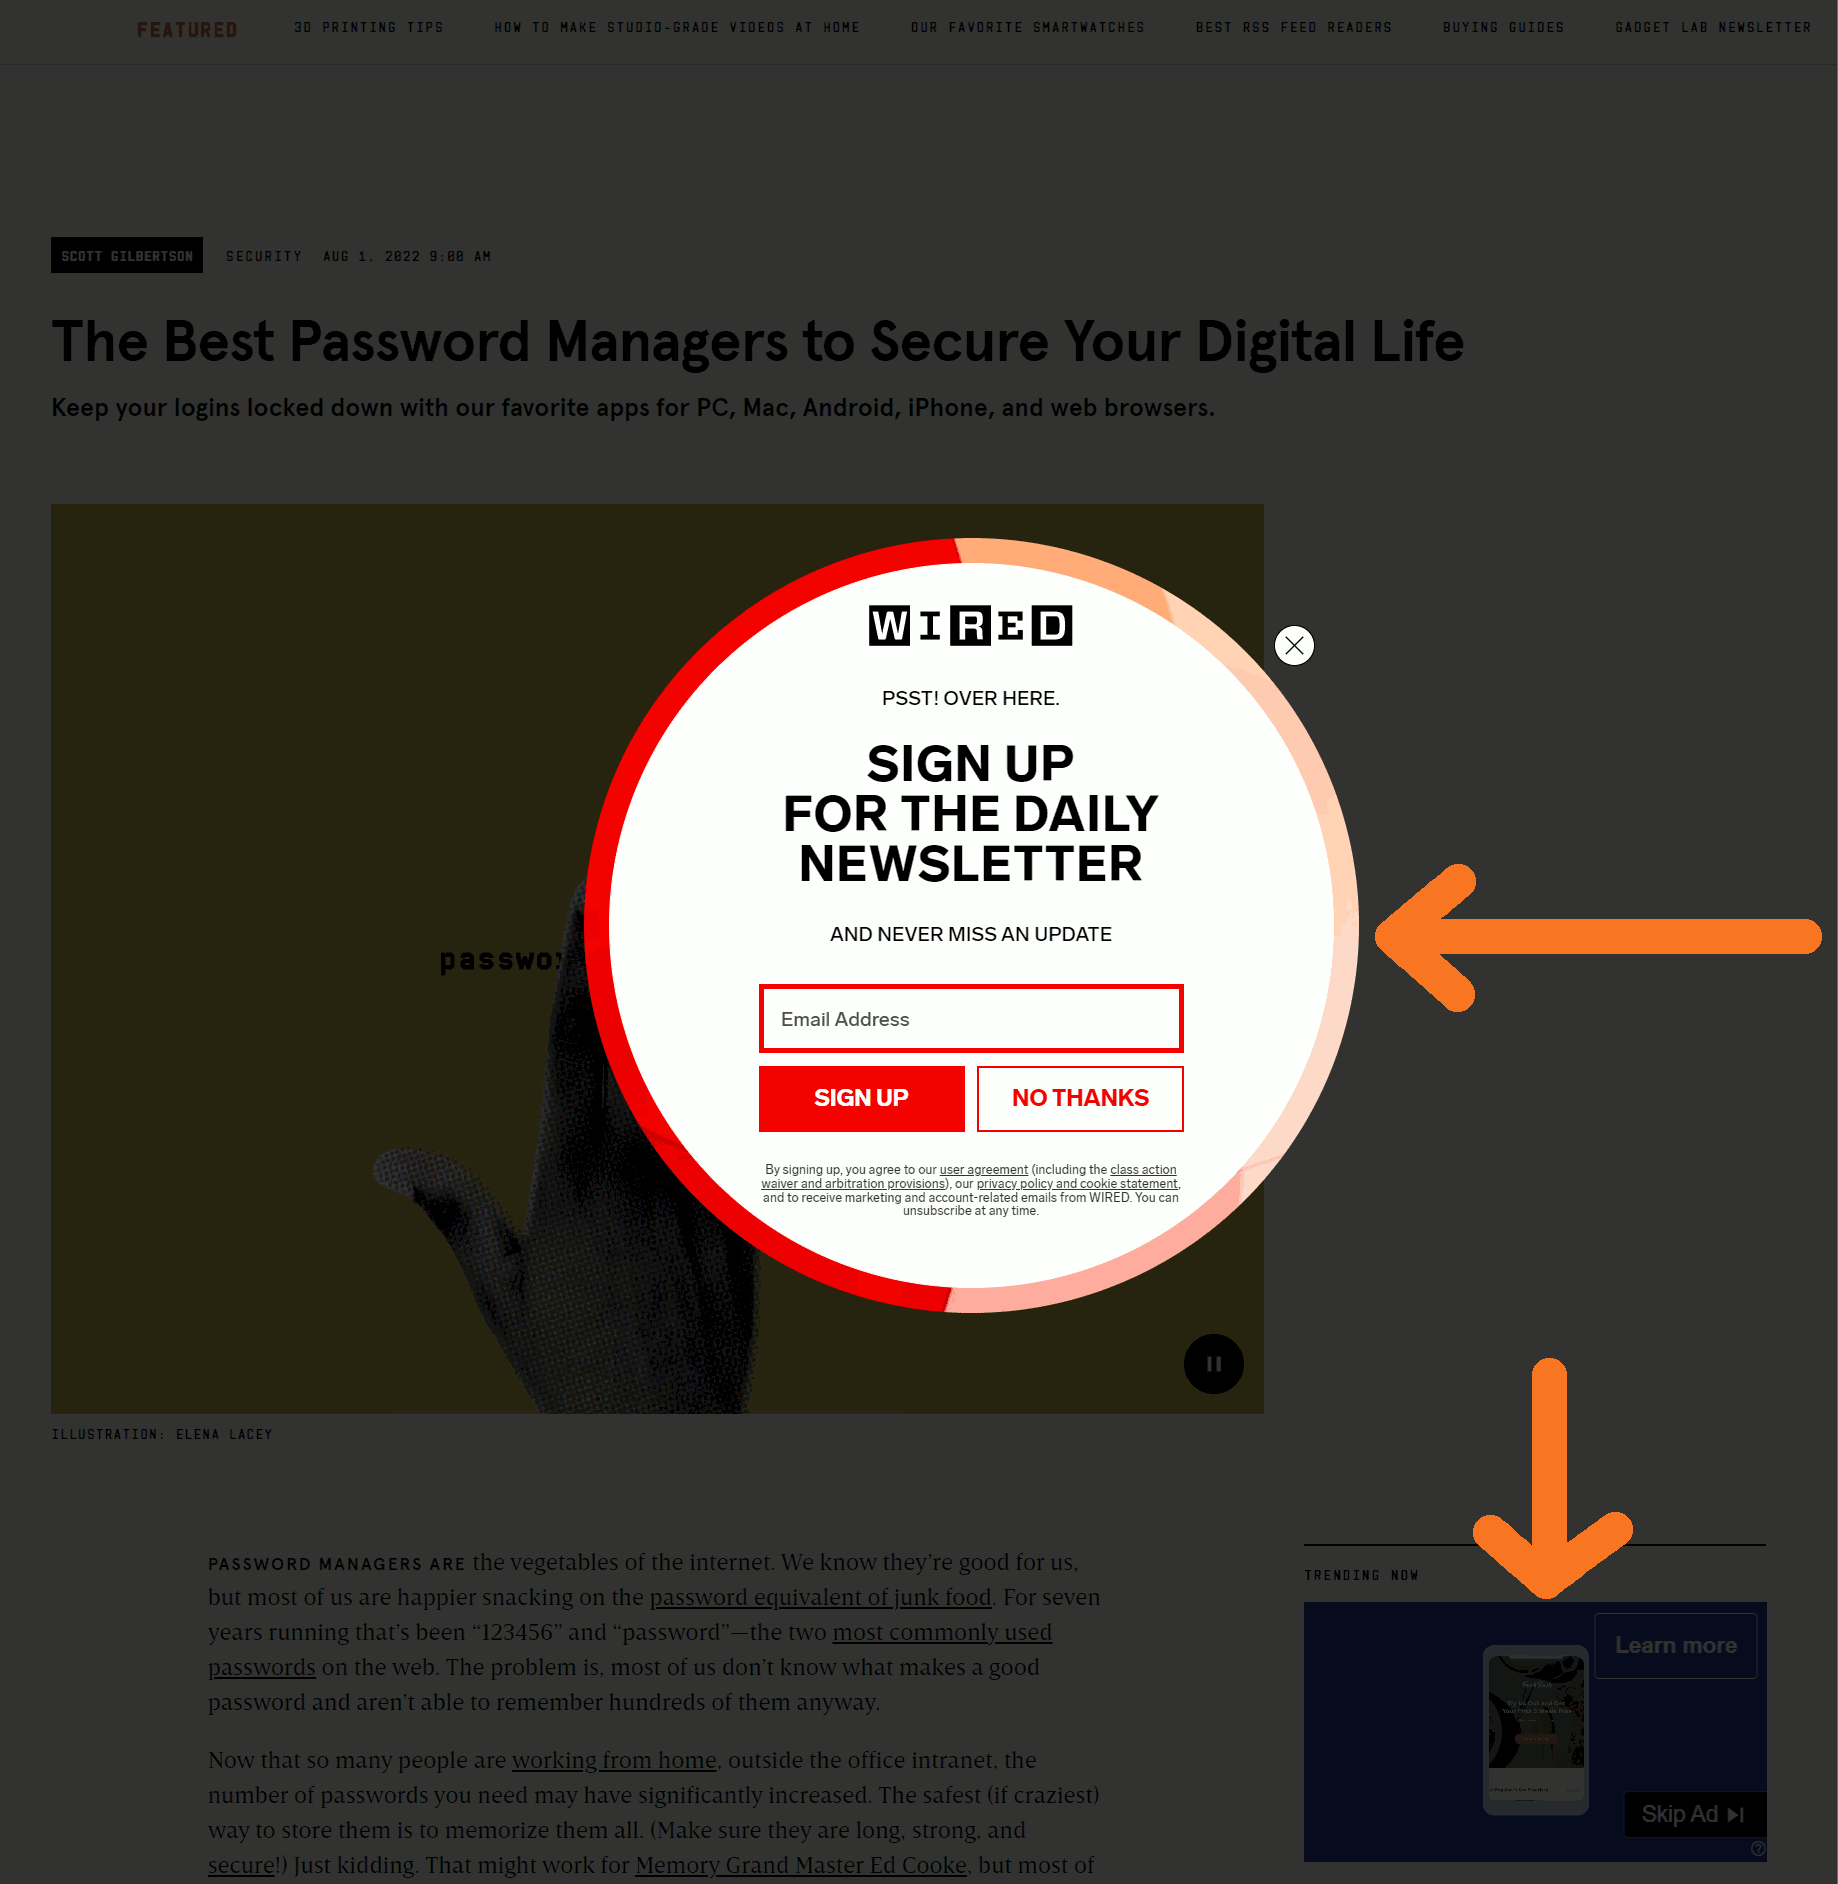 Example of Microsoft Edge's Immersive Reader feature in action